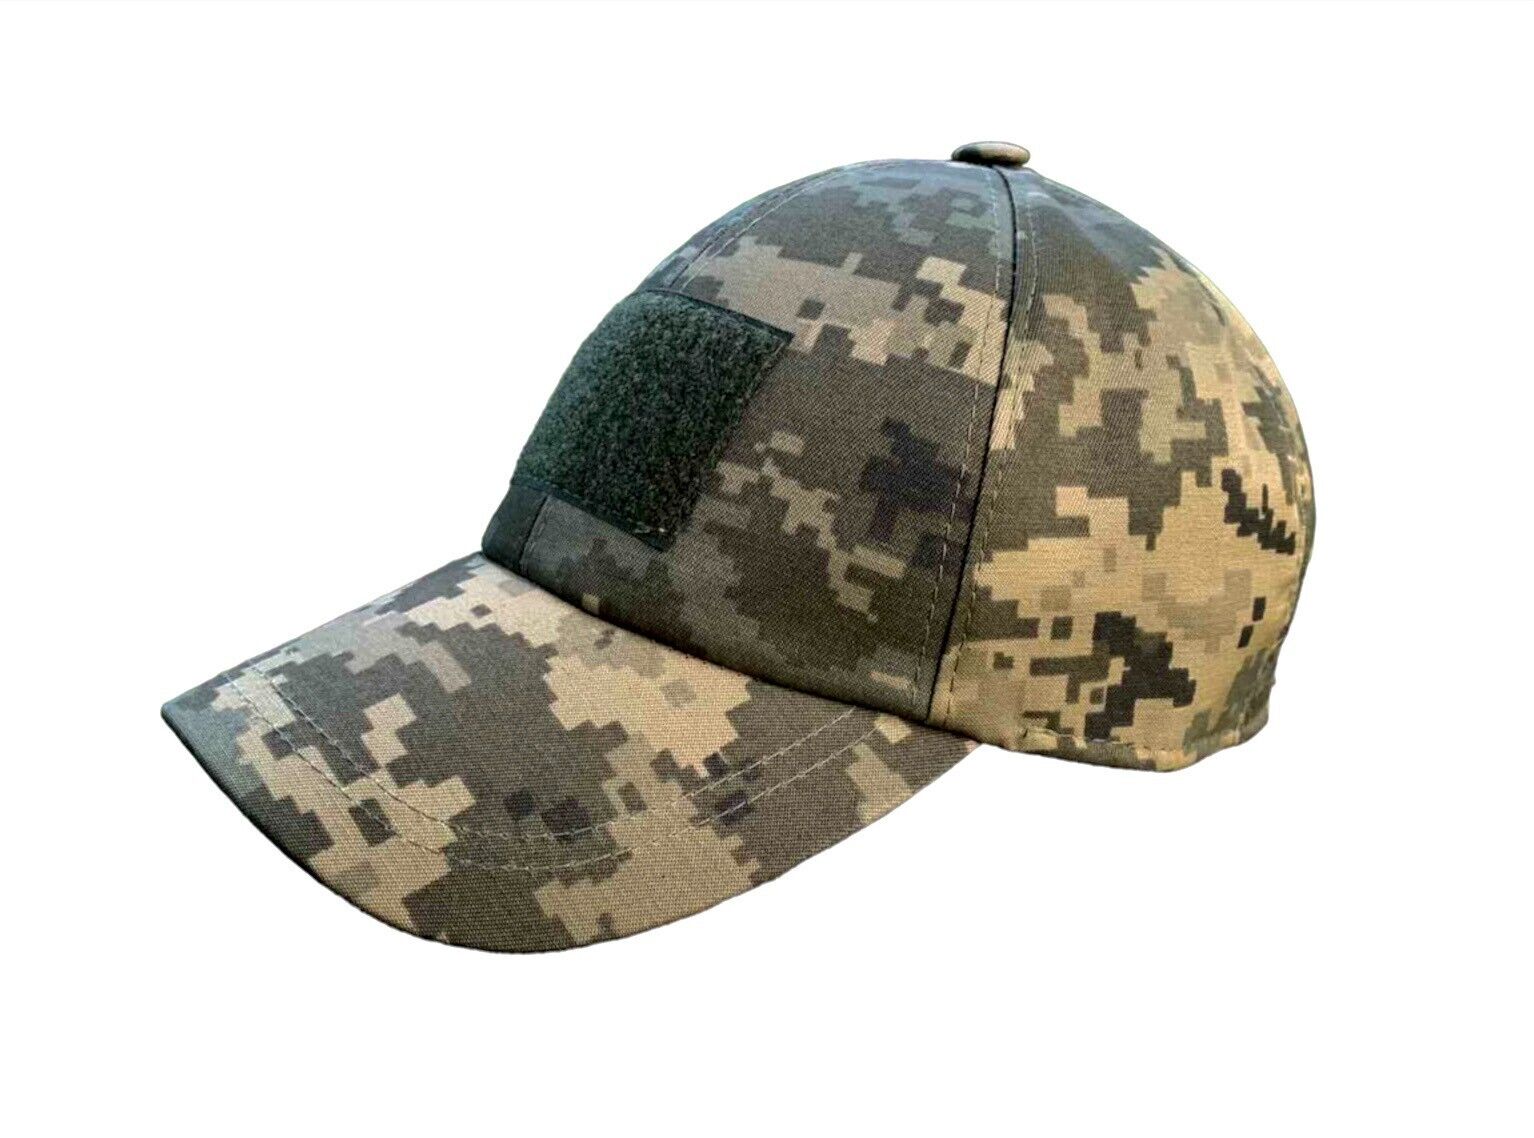 Baseball cap of the Ukrainian army MM-14 with a patch panel Military Special